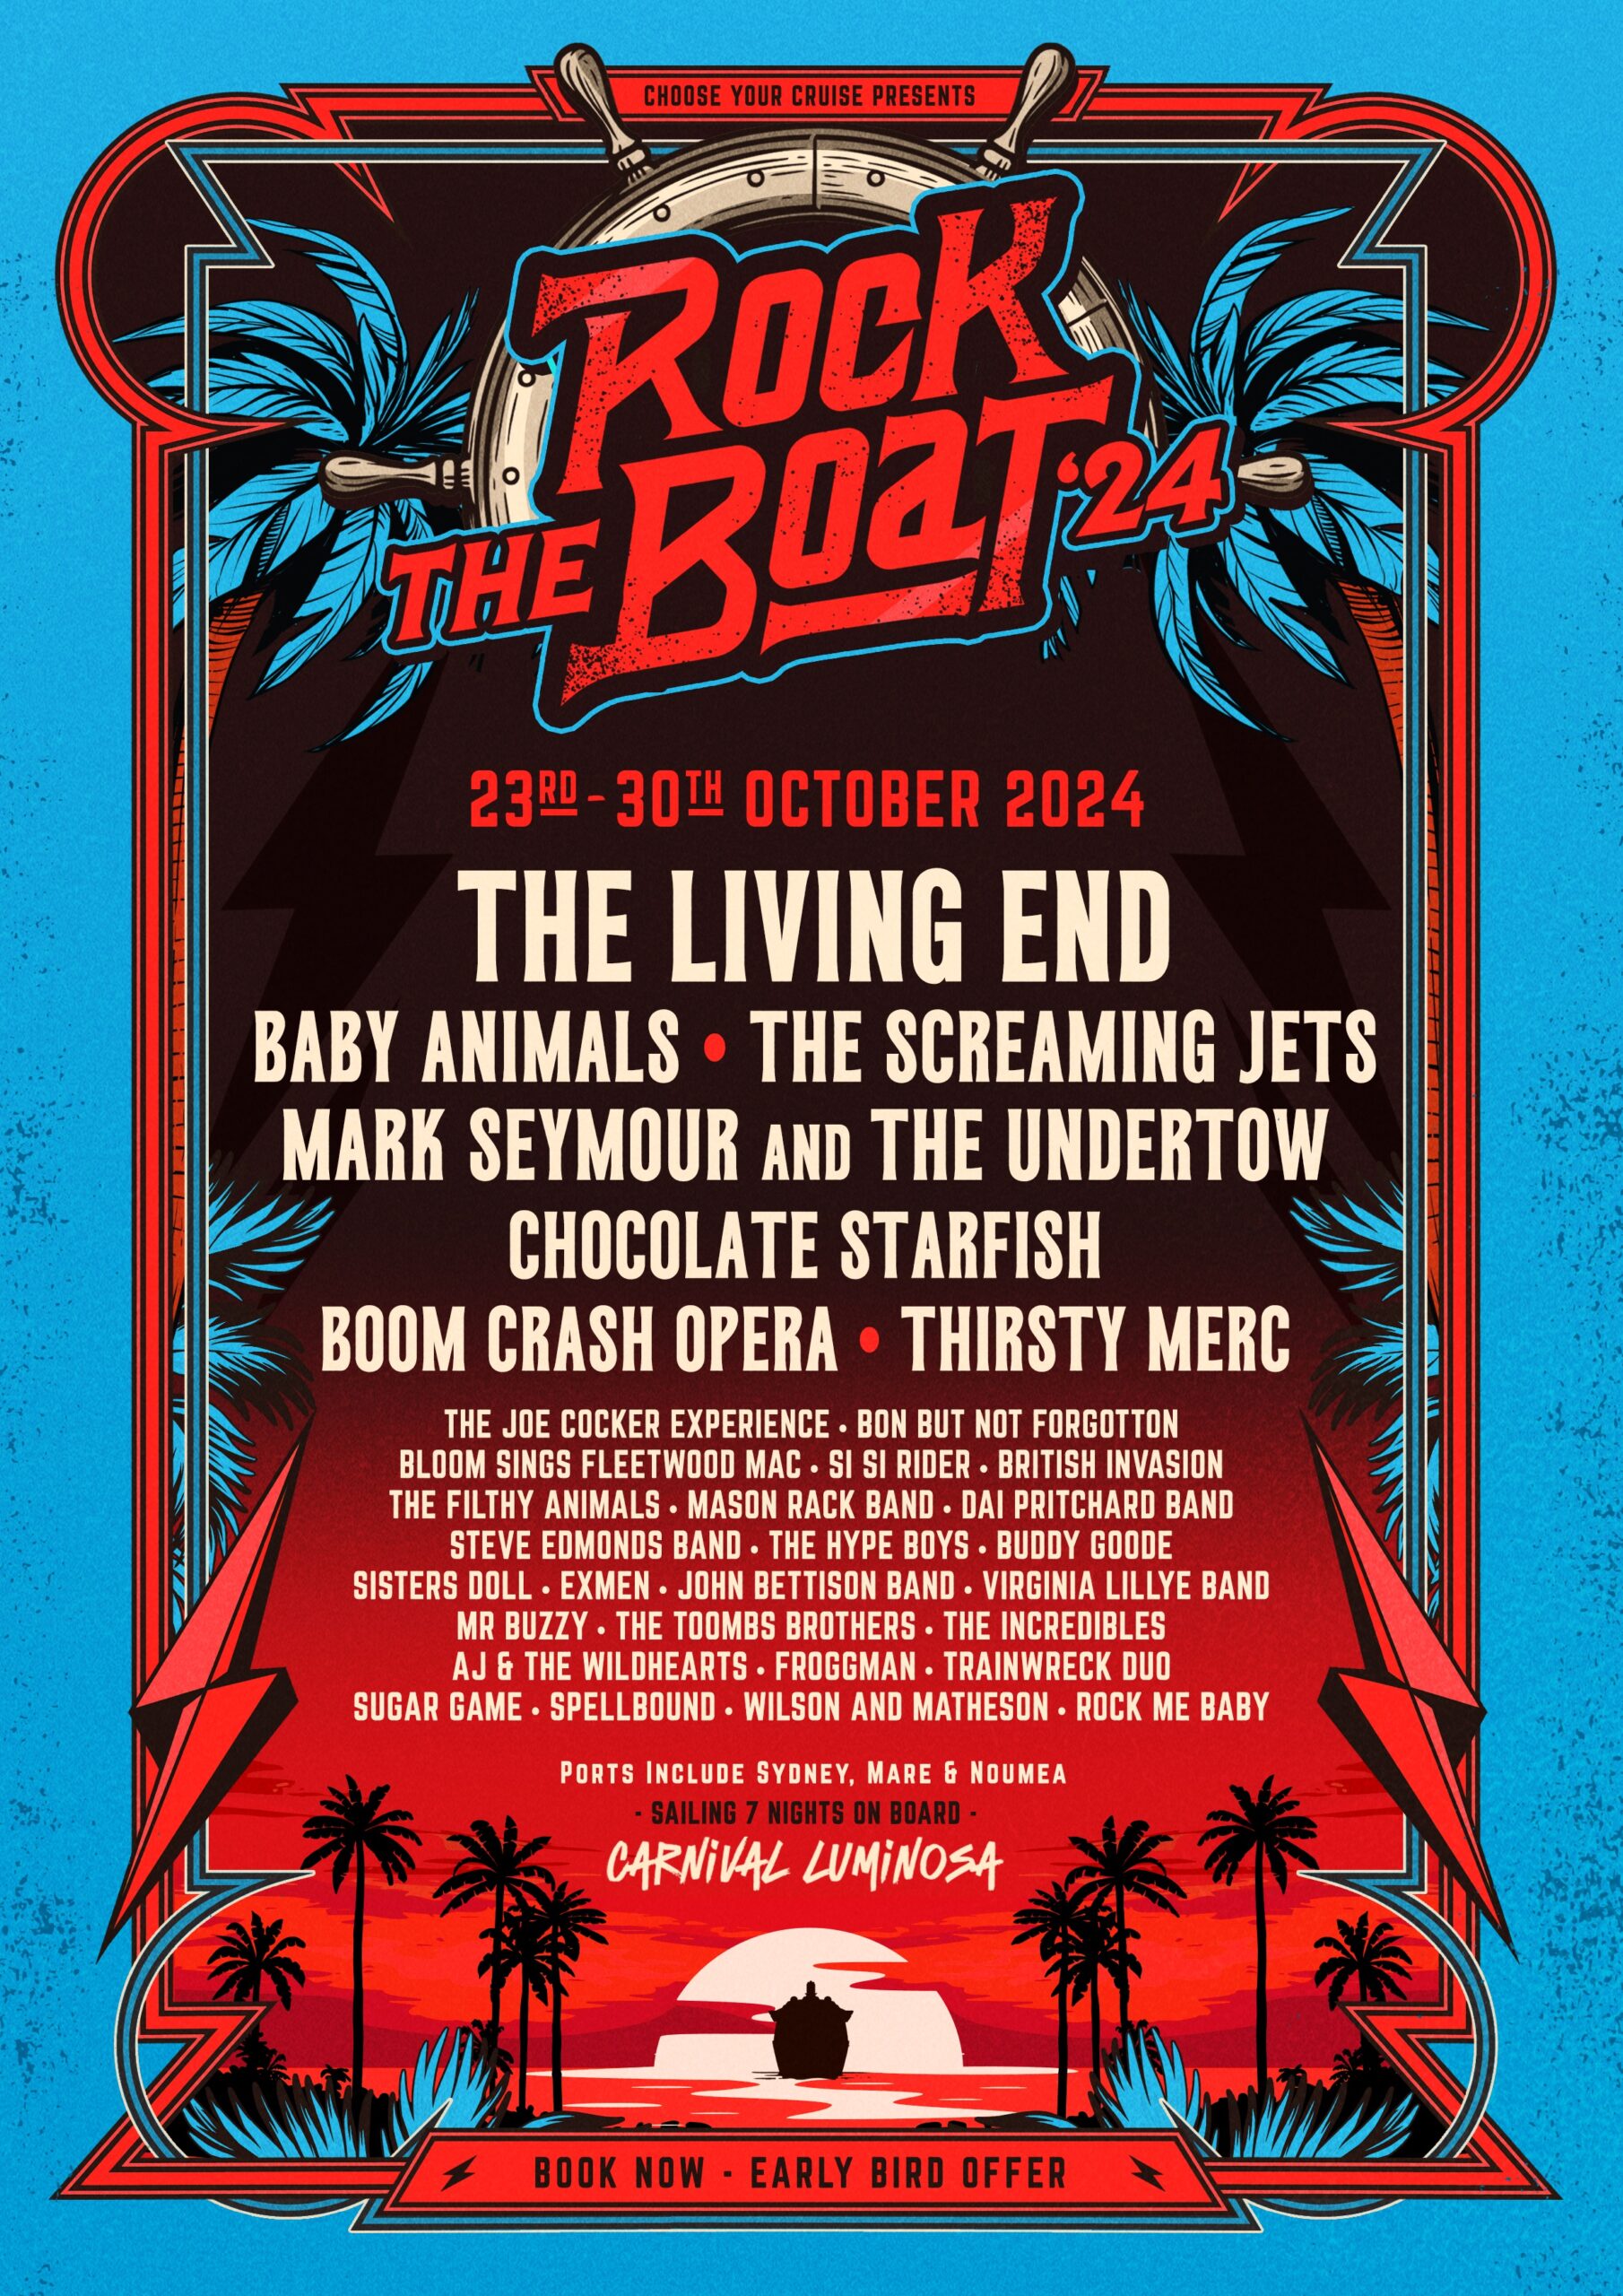 Rock the Boat 24